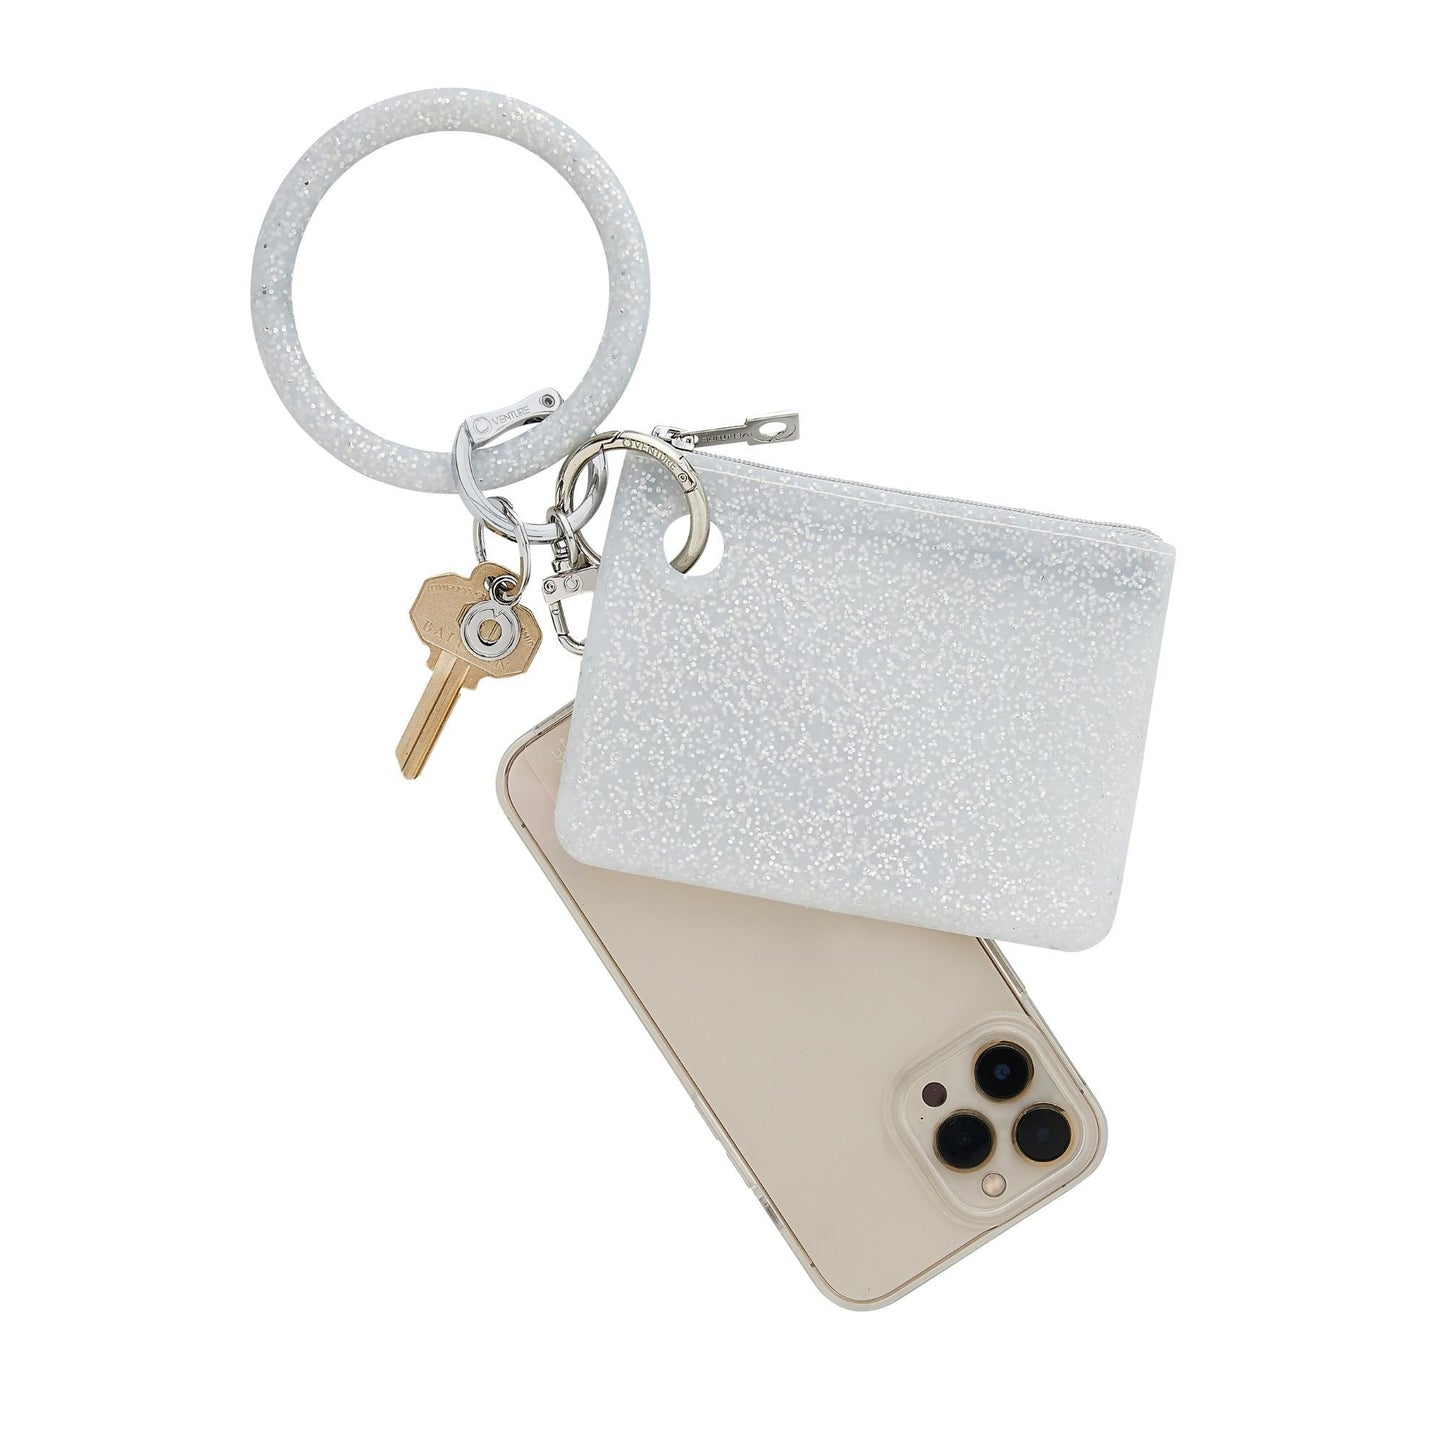 Silicone 3 in 1 set with Quicksilver confetti Big O Key ring, Phone Connector and matching Mini Pouch